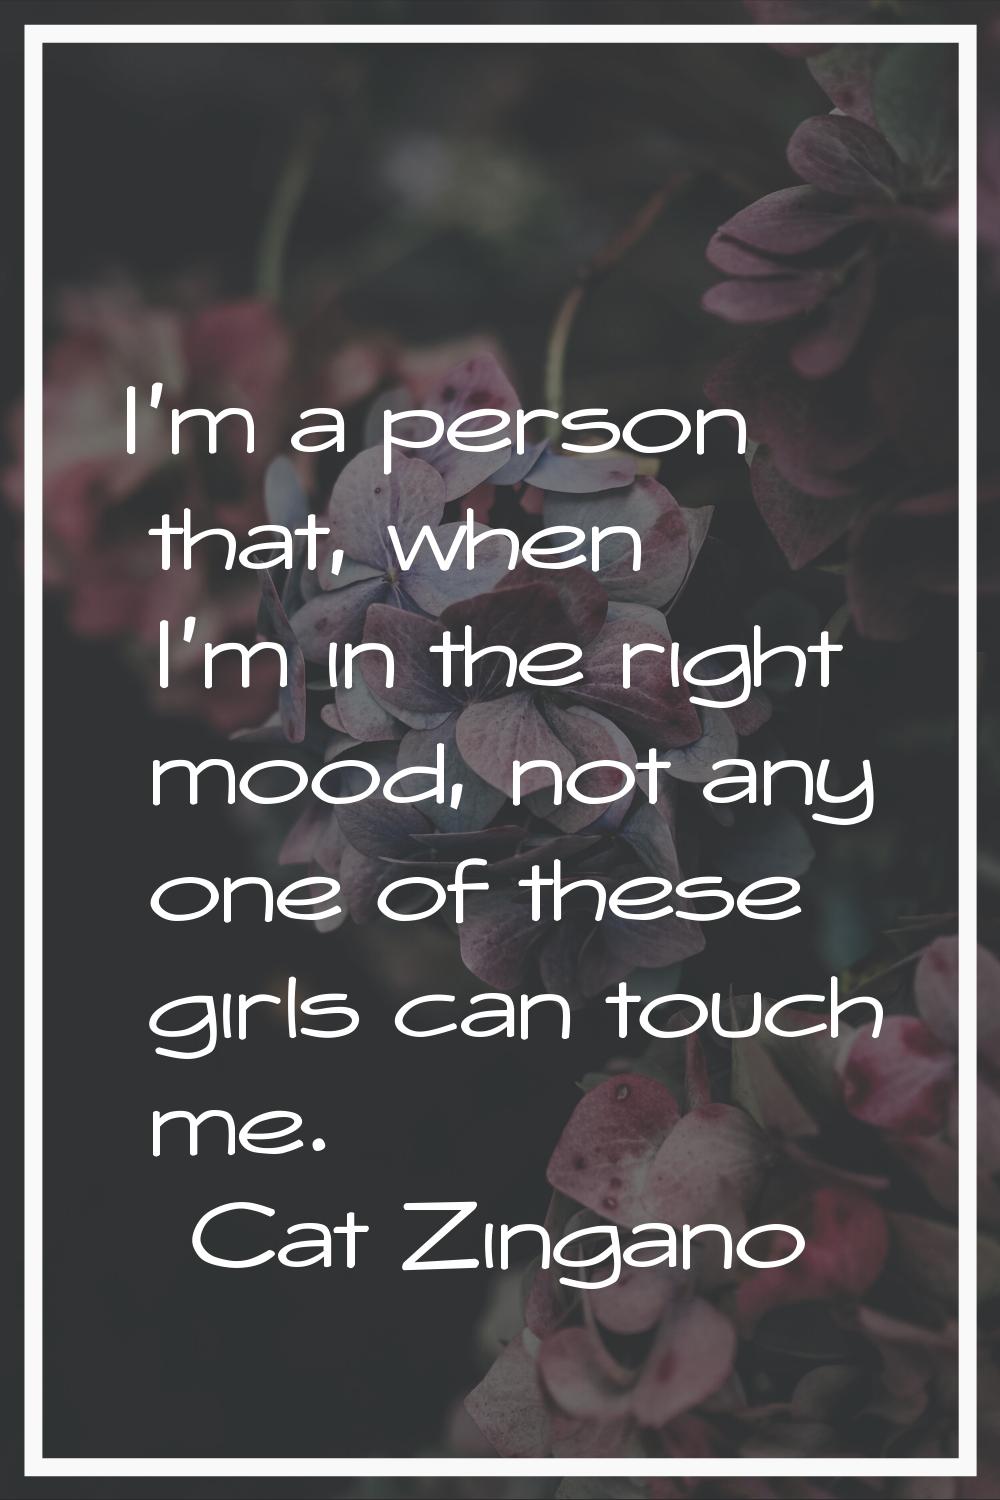 I'm a person that, when I'm in the right mood, not any one of these girls can touch me.